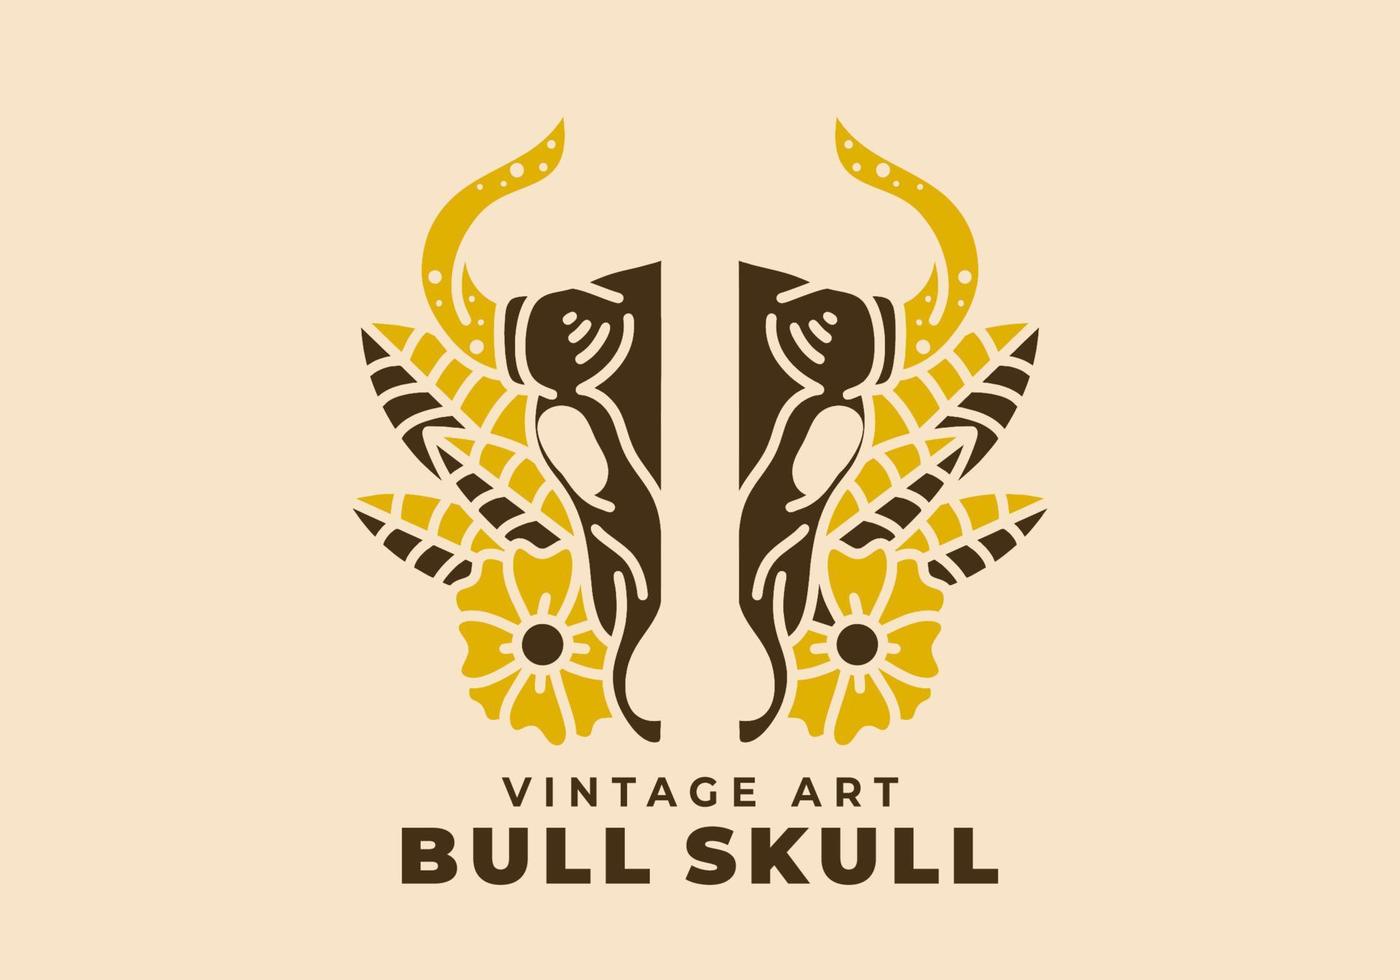 Vintage art illustration of a bull skull and flowers round it vector